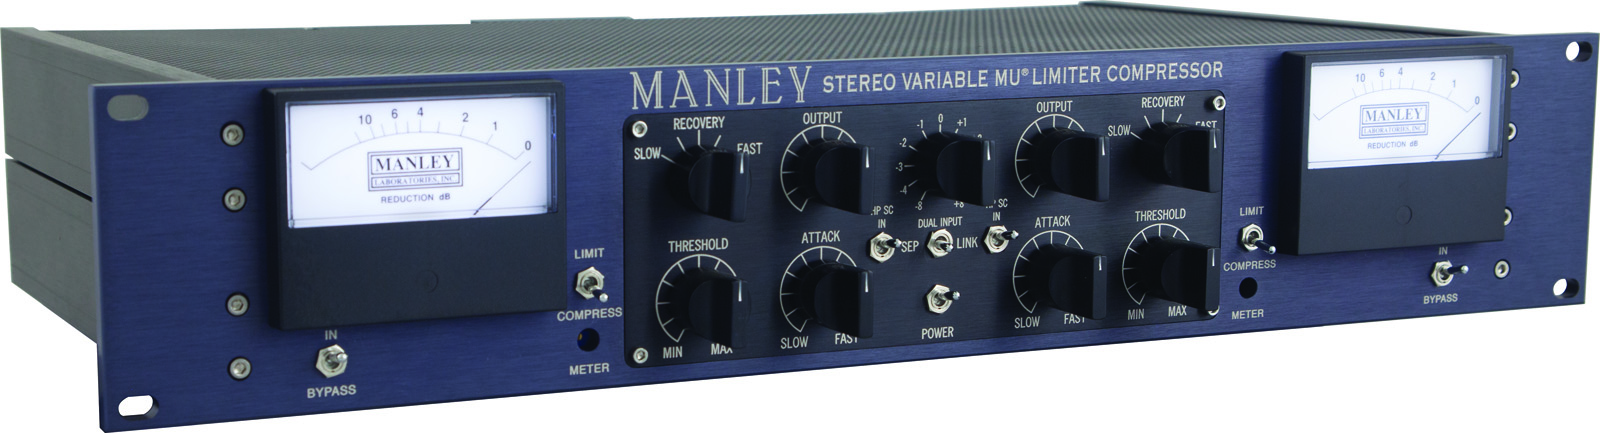 Manley Stereo Variable Mu Mastering - Effects processor - Variation 3